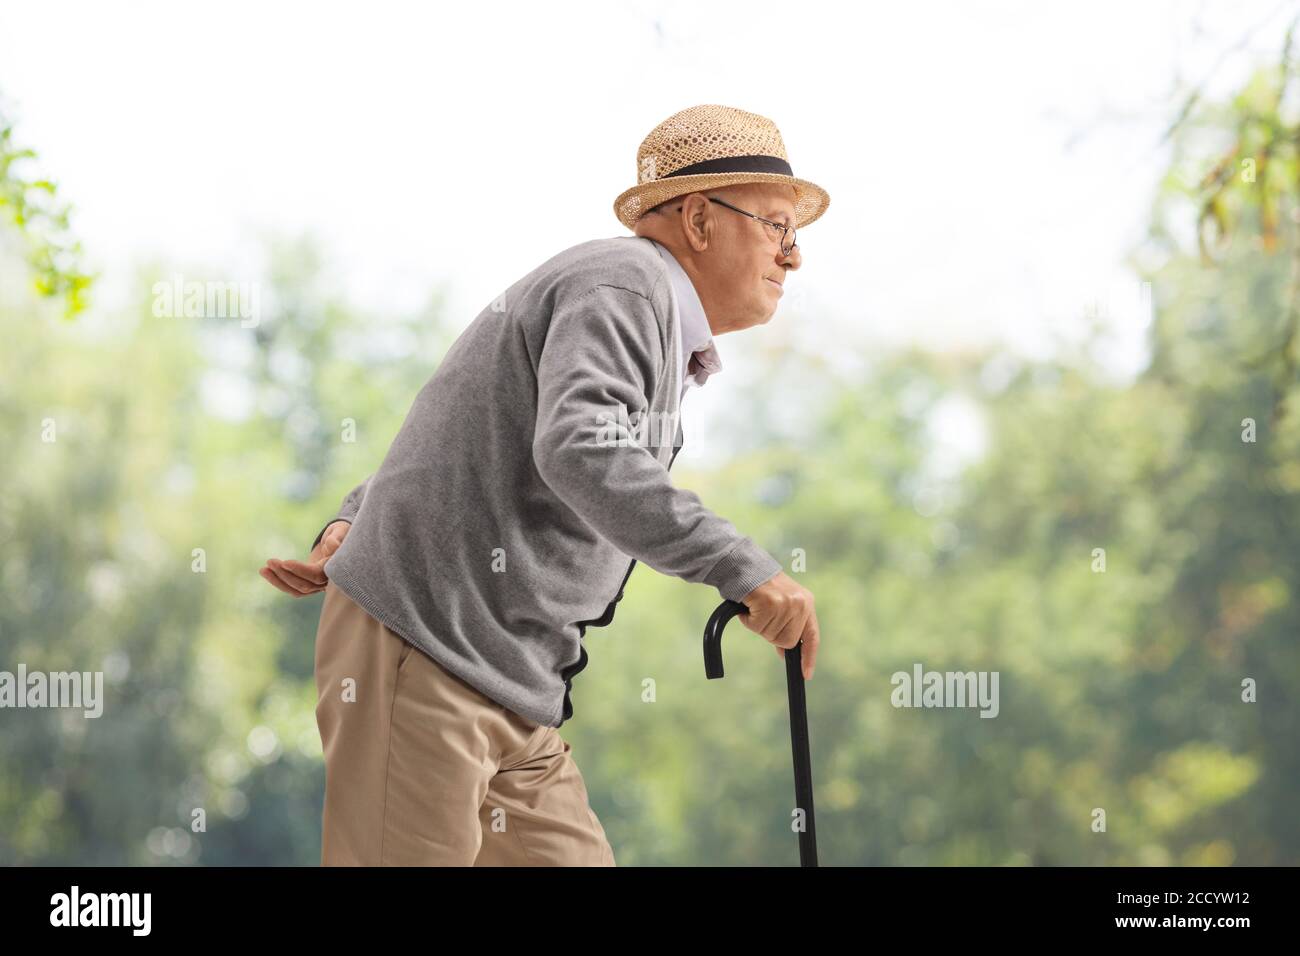 Elderly man walking with a cane in a park Stock Photo